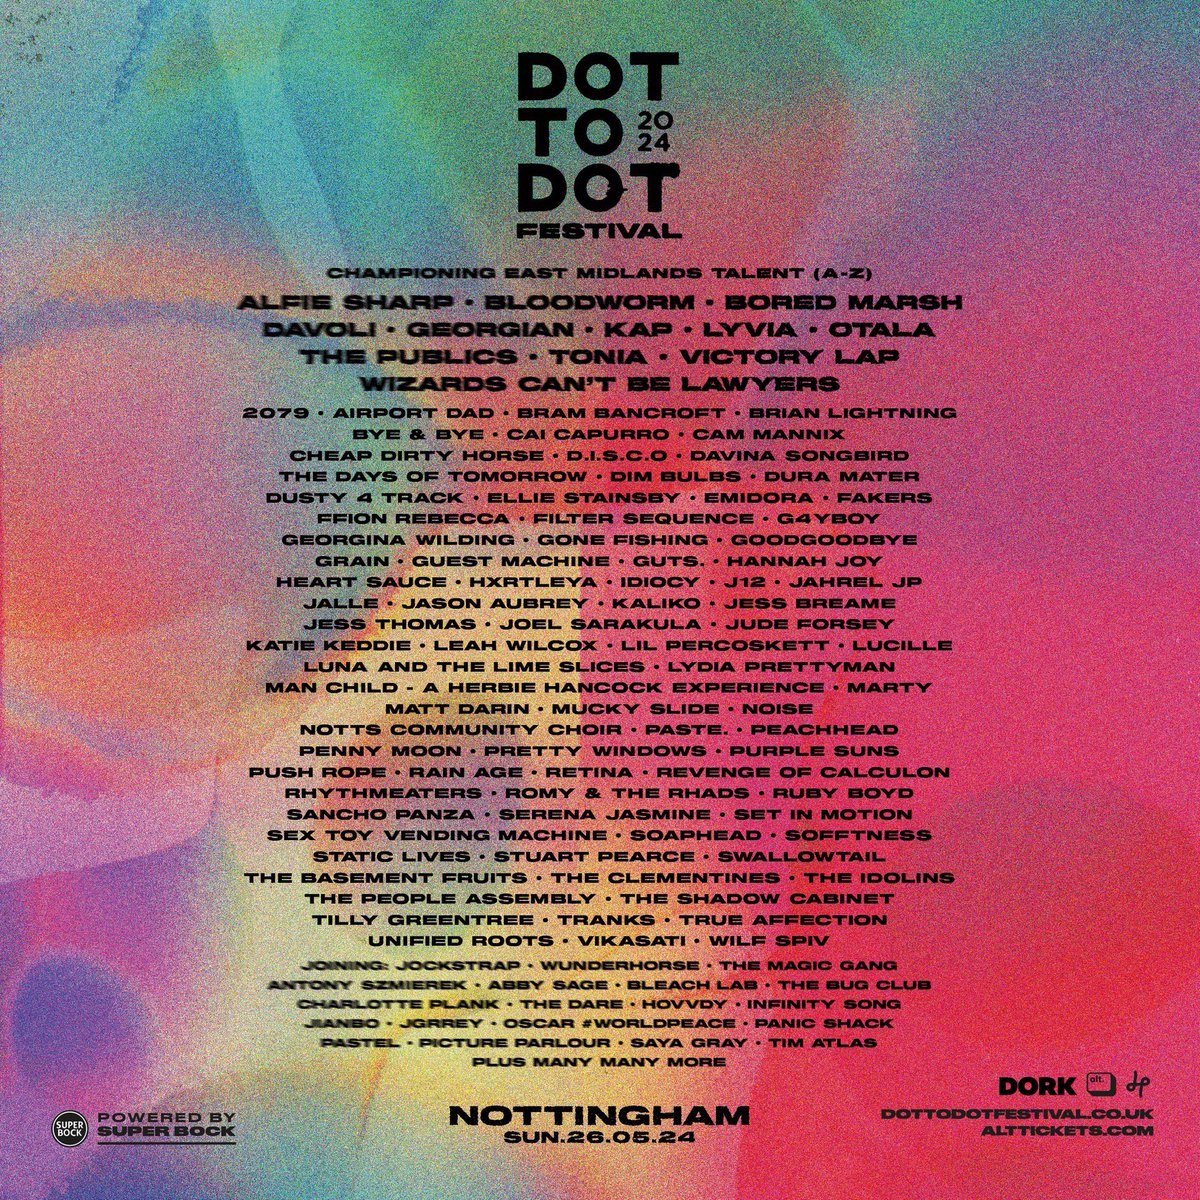 🤩 It’s Dot To Dot Nottingham day!! 🎶 @LeftLion photographers and writers will be there - come and say hi 👋🏻